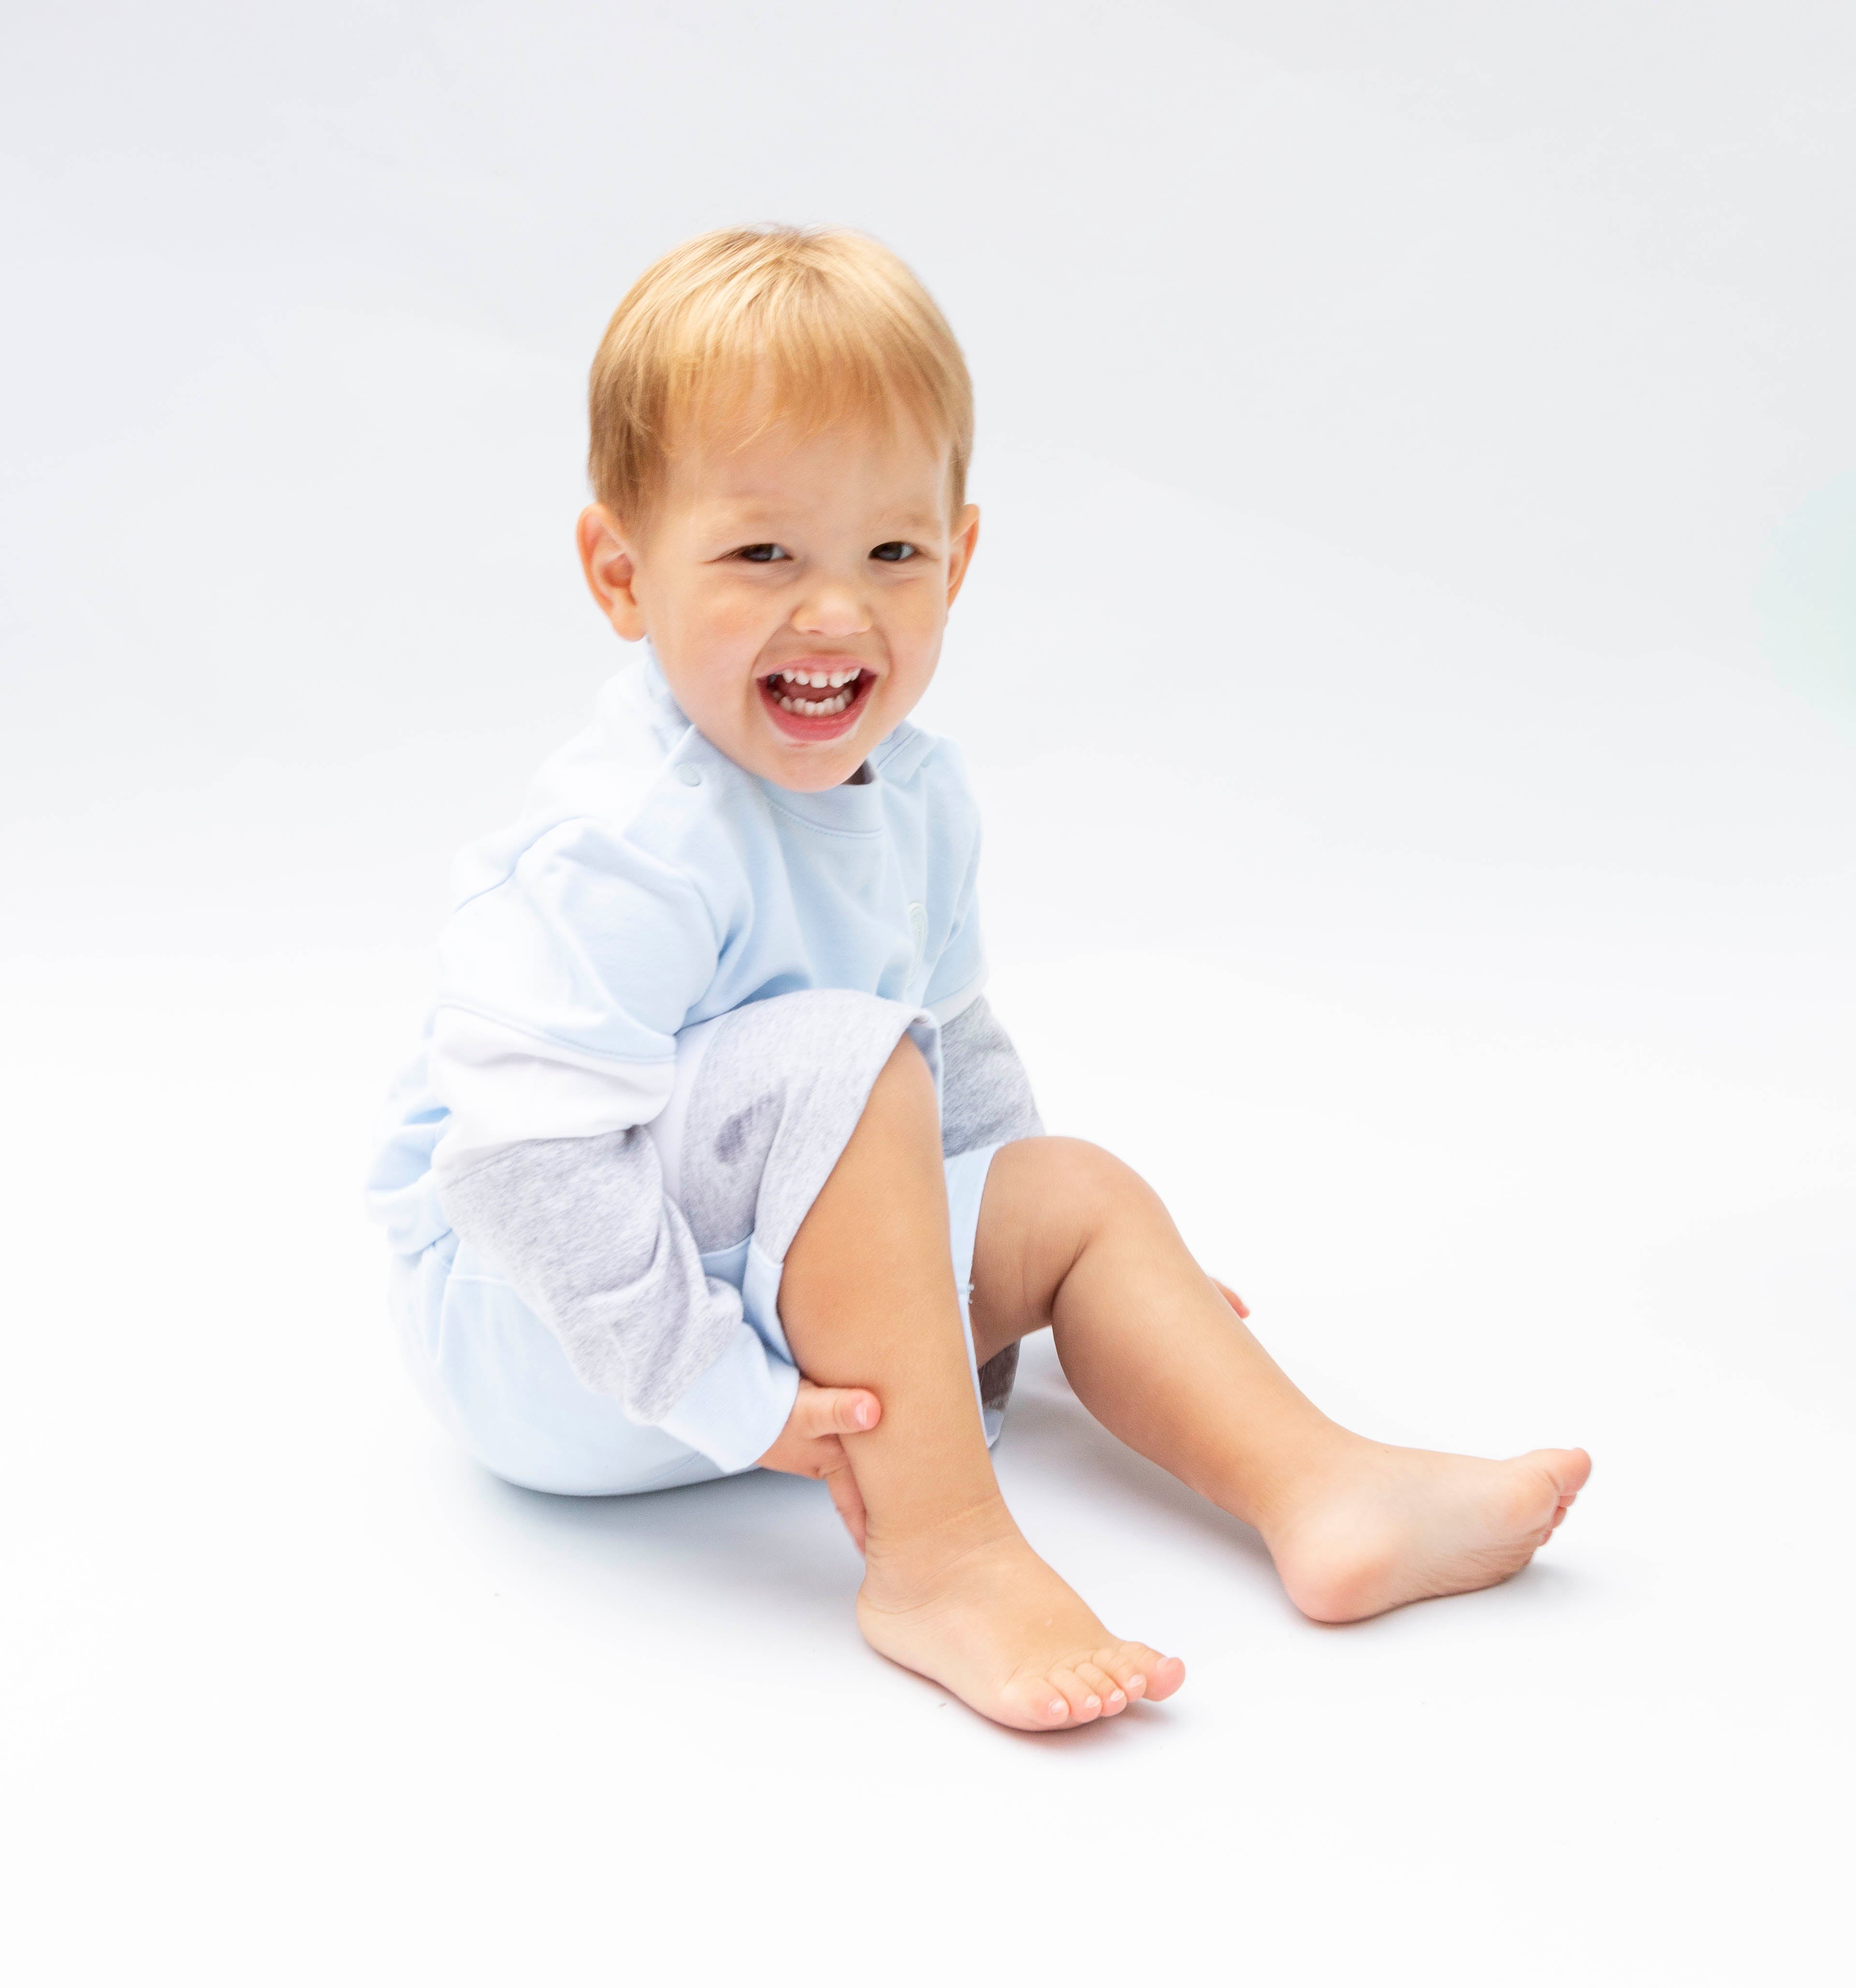 <p>Keep your little boy stylish and comfortable this spring and summer with our Mintini Baby branded boys sweater and shorts set. Available in sizes 3 month up to 24 months, this set features a round neck sweater and elasticated waistband shorts in a classic pastel blue, white, and grey colour scheme. Perfect for any occasion, let him enjoy the warm seasons in style.</p>